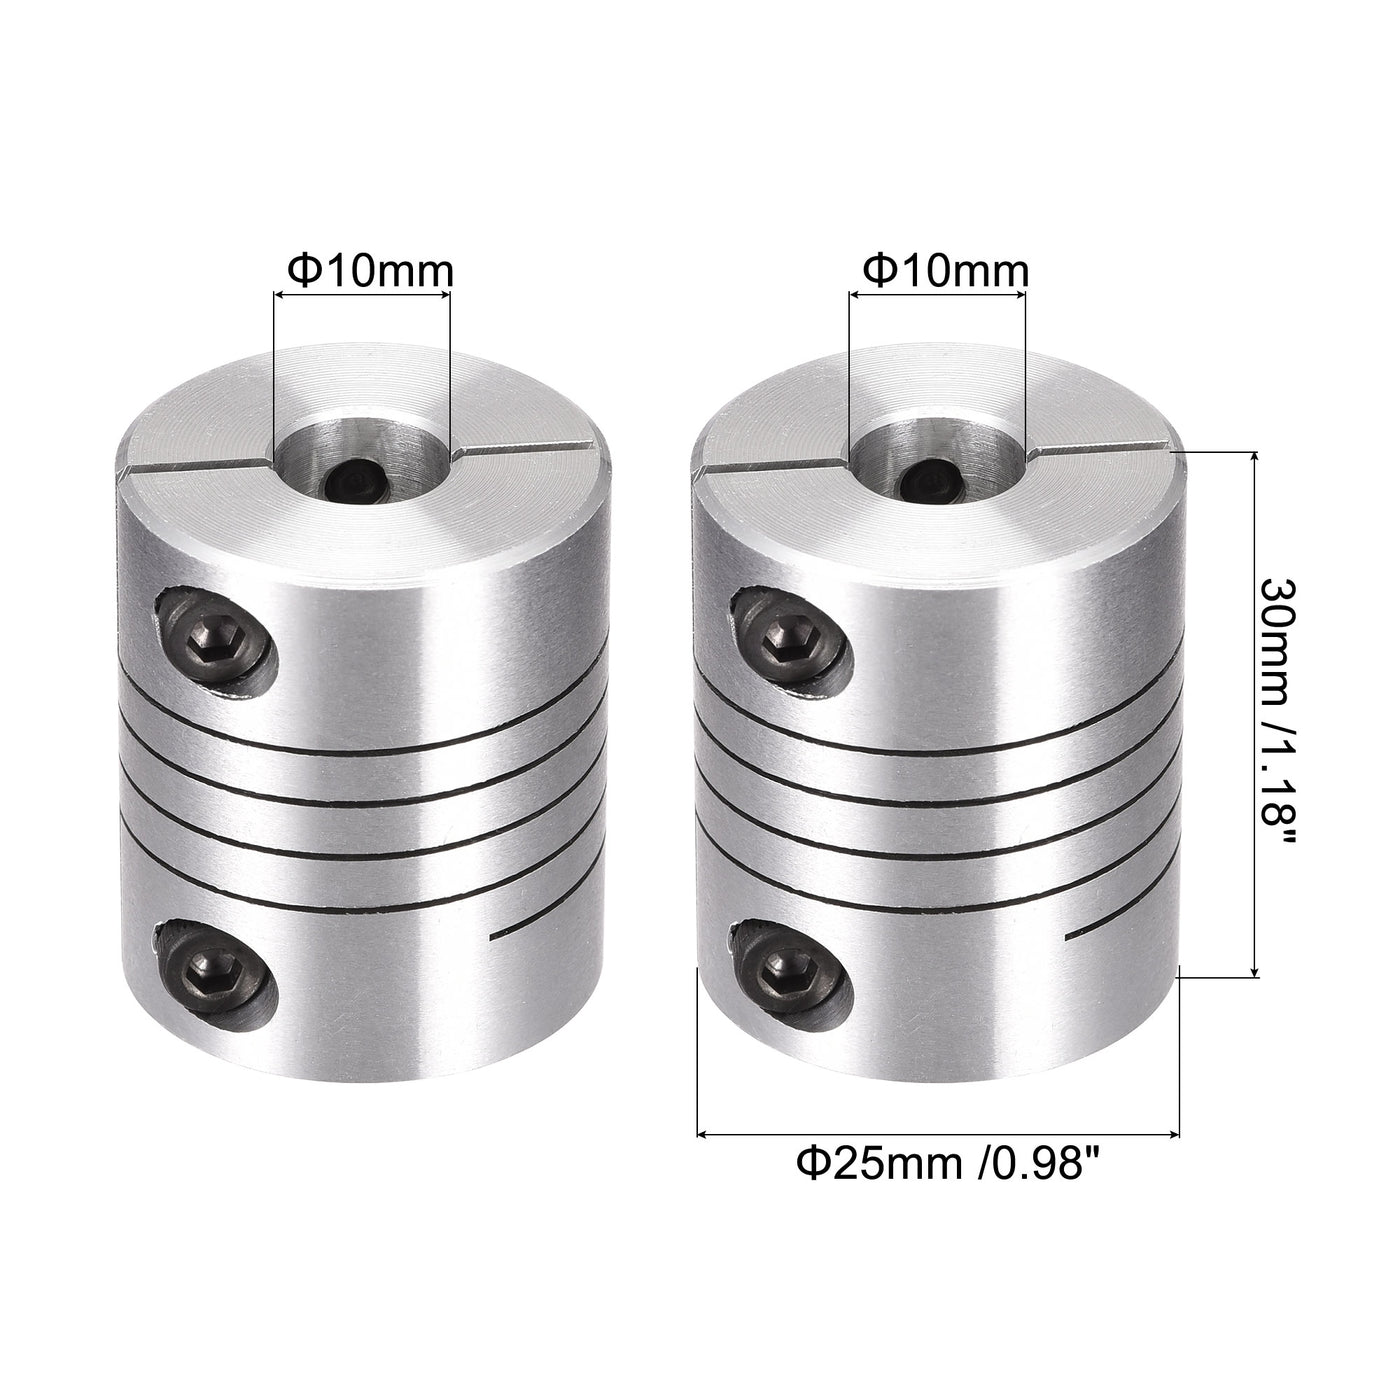 uxcell Uxcell 2PCS Motor Shaft 10mm to 10mm Helical Beam Coupler Coupling 25mm Dia 30mm Length